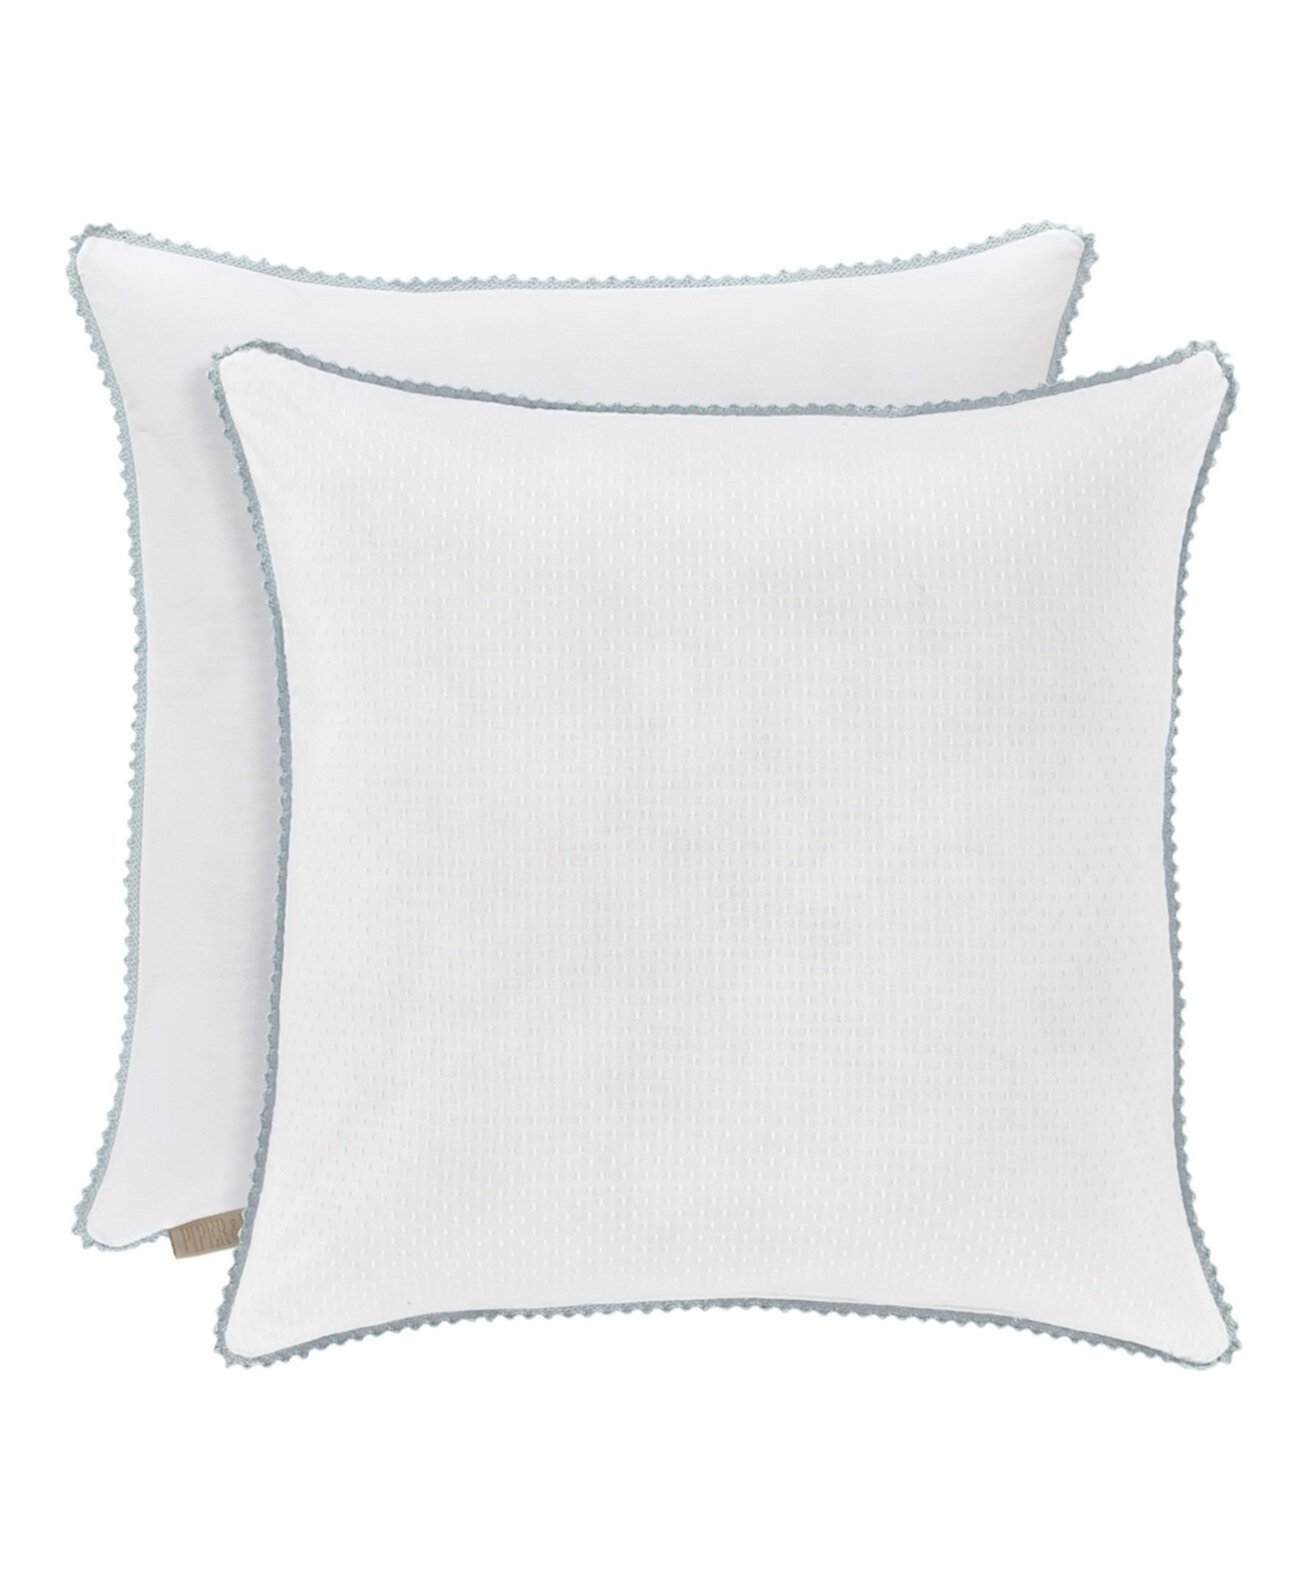 Katelyn 18" Square Decorative Throw Pillow Piper & Wright